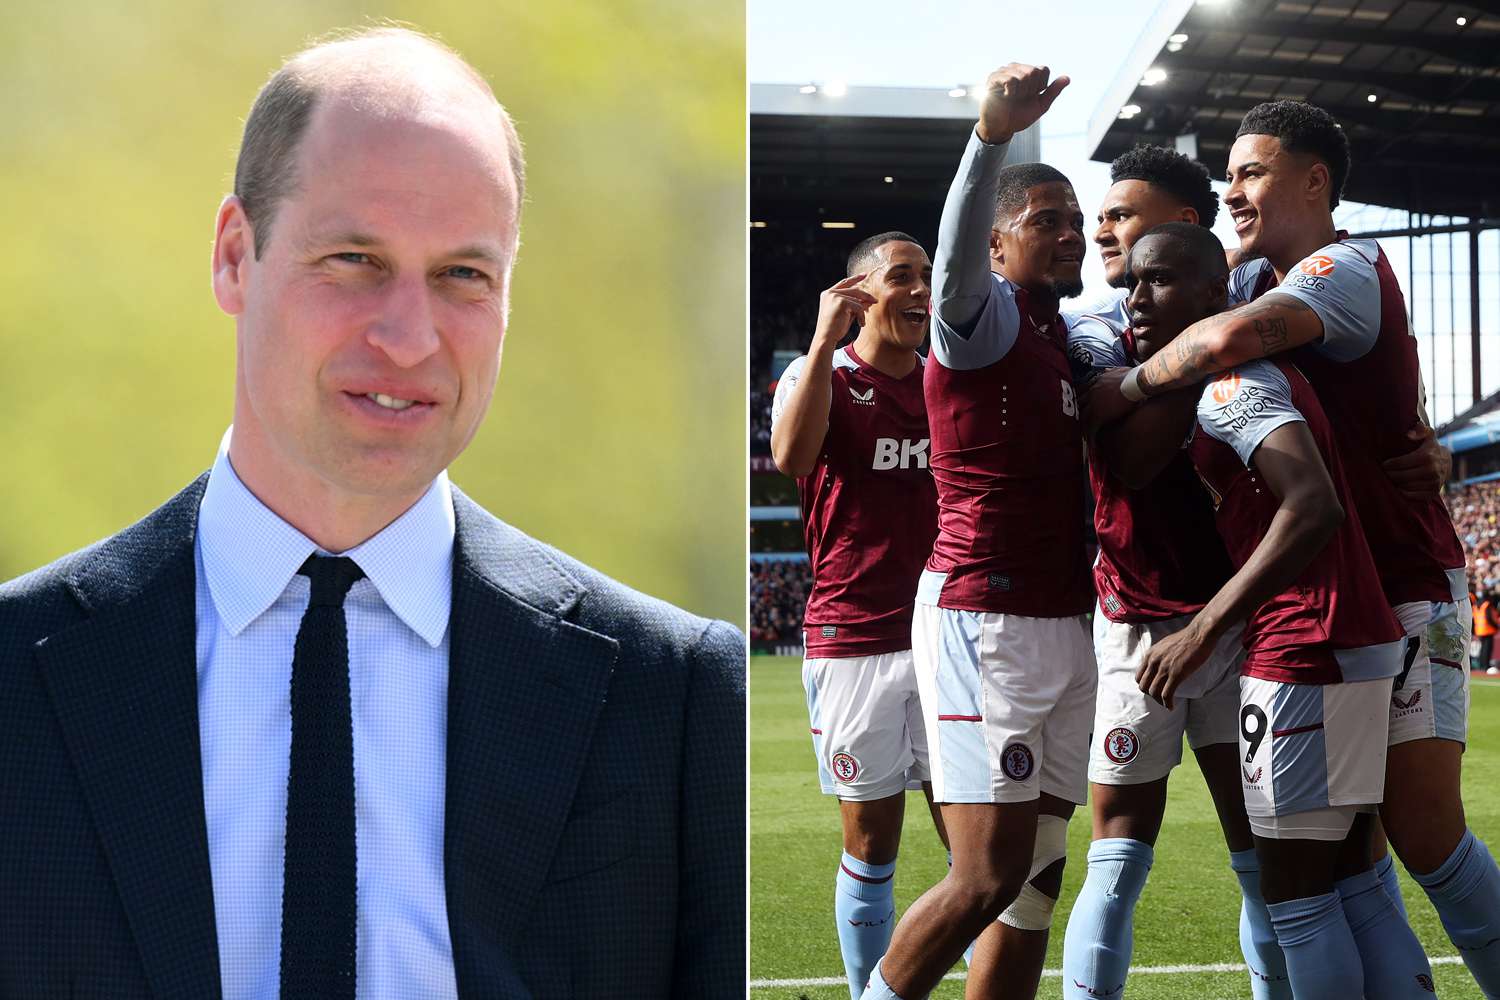 Prince William Celebrates Exciting News for His Favorite Soccer Team